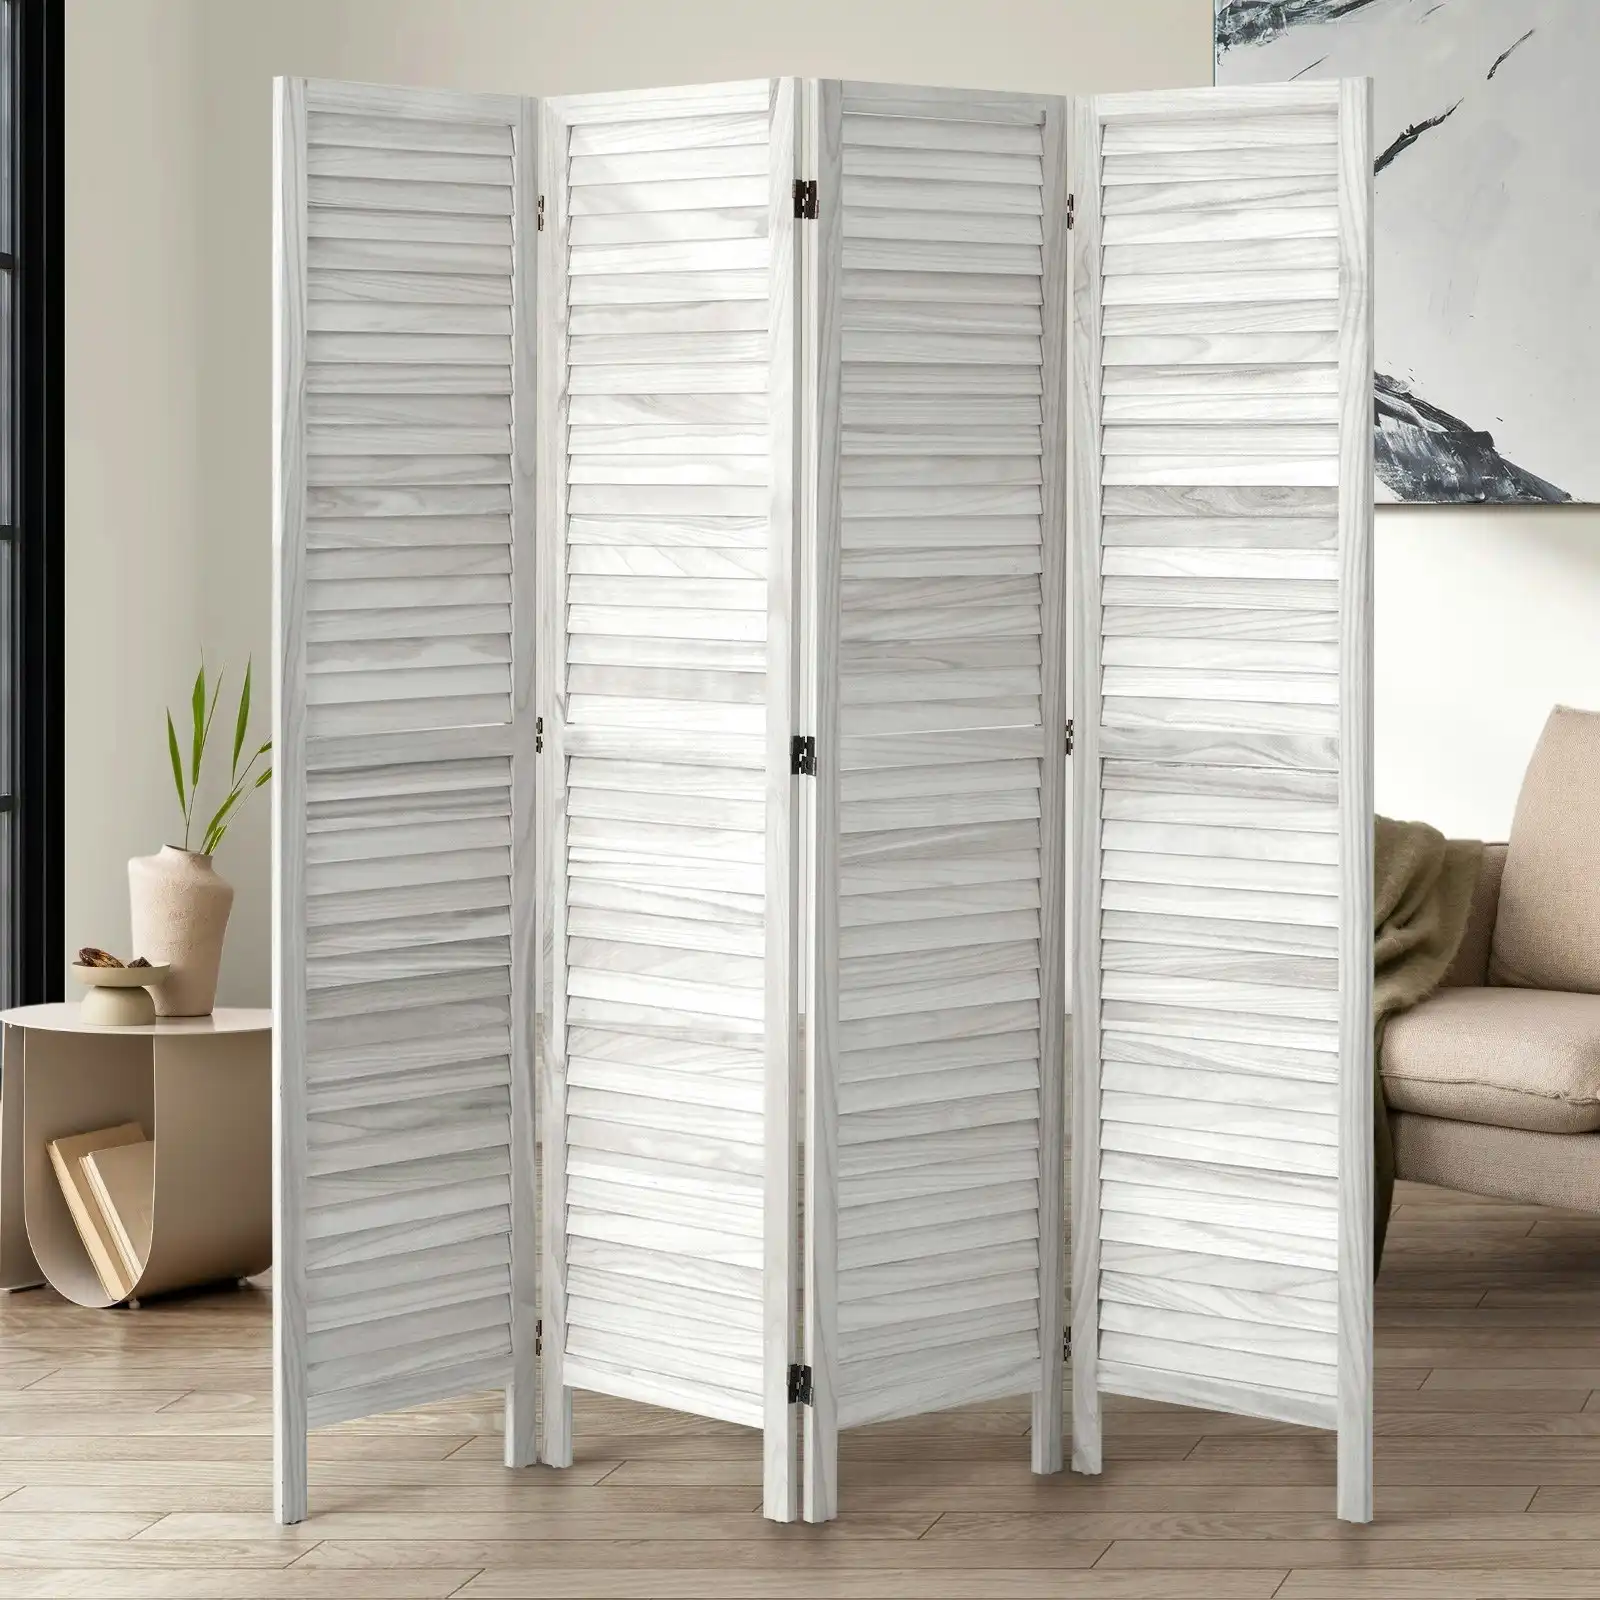 Oikiture 4 Panel Room Divider Privacy Screen Partition Timber Wooden Fold White